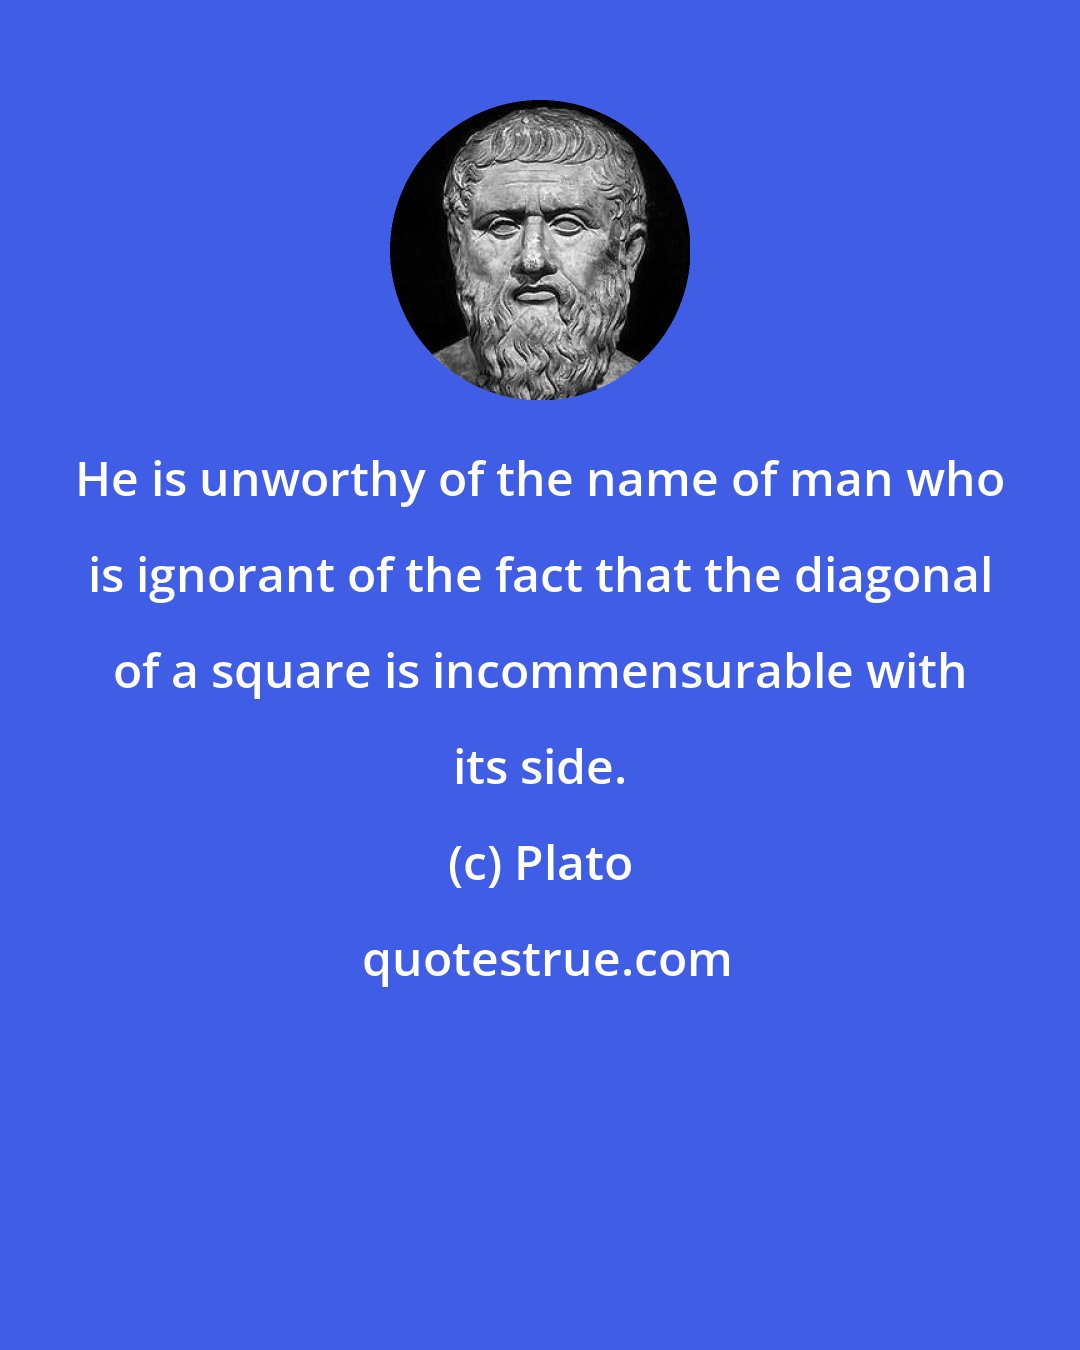 Plato: He is unworthy of the name of man who is ignorant of the fact that the diagonal of a square is incommensurable with its side.